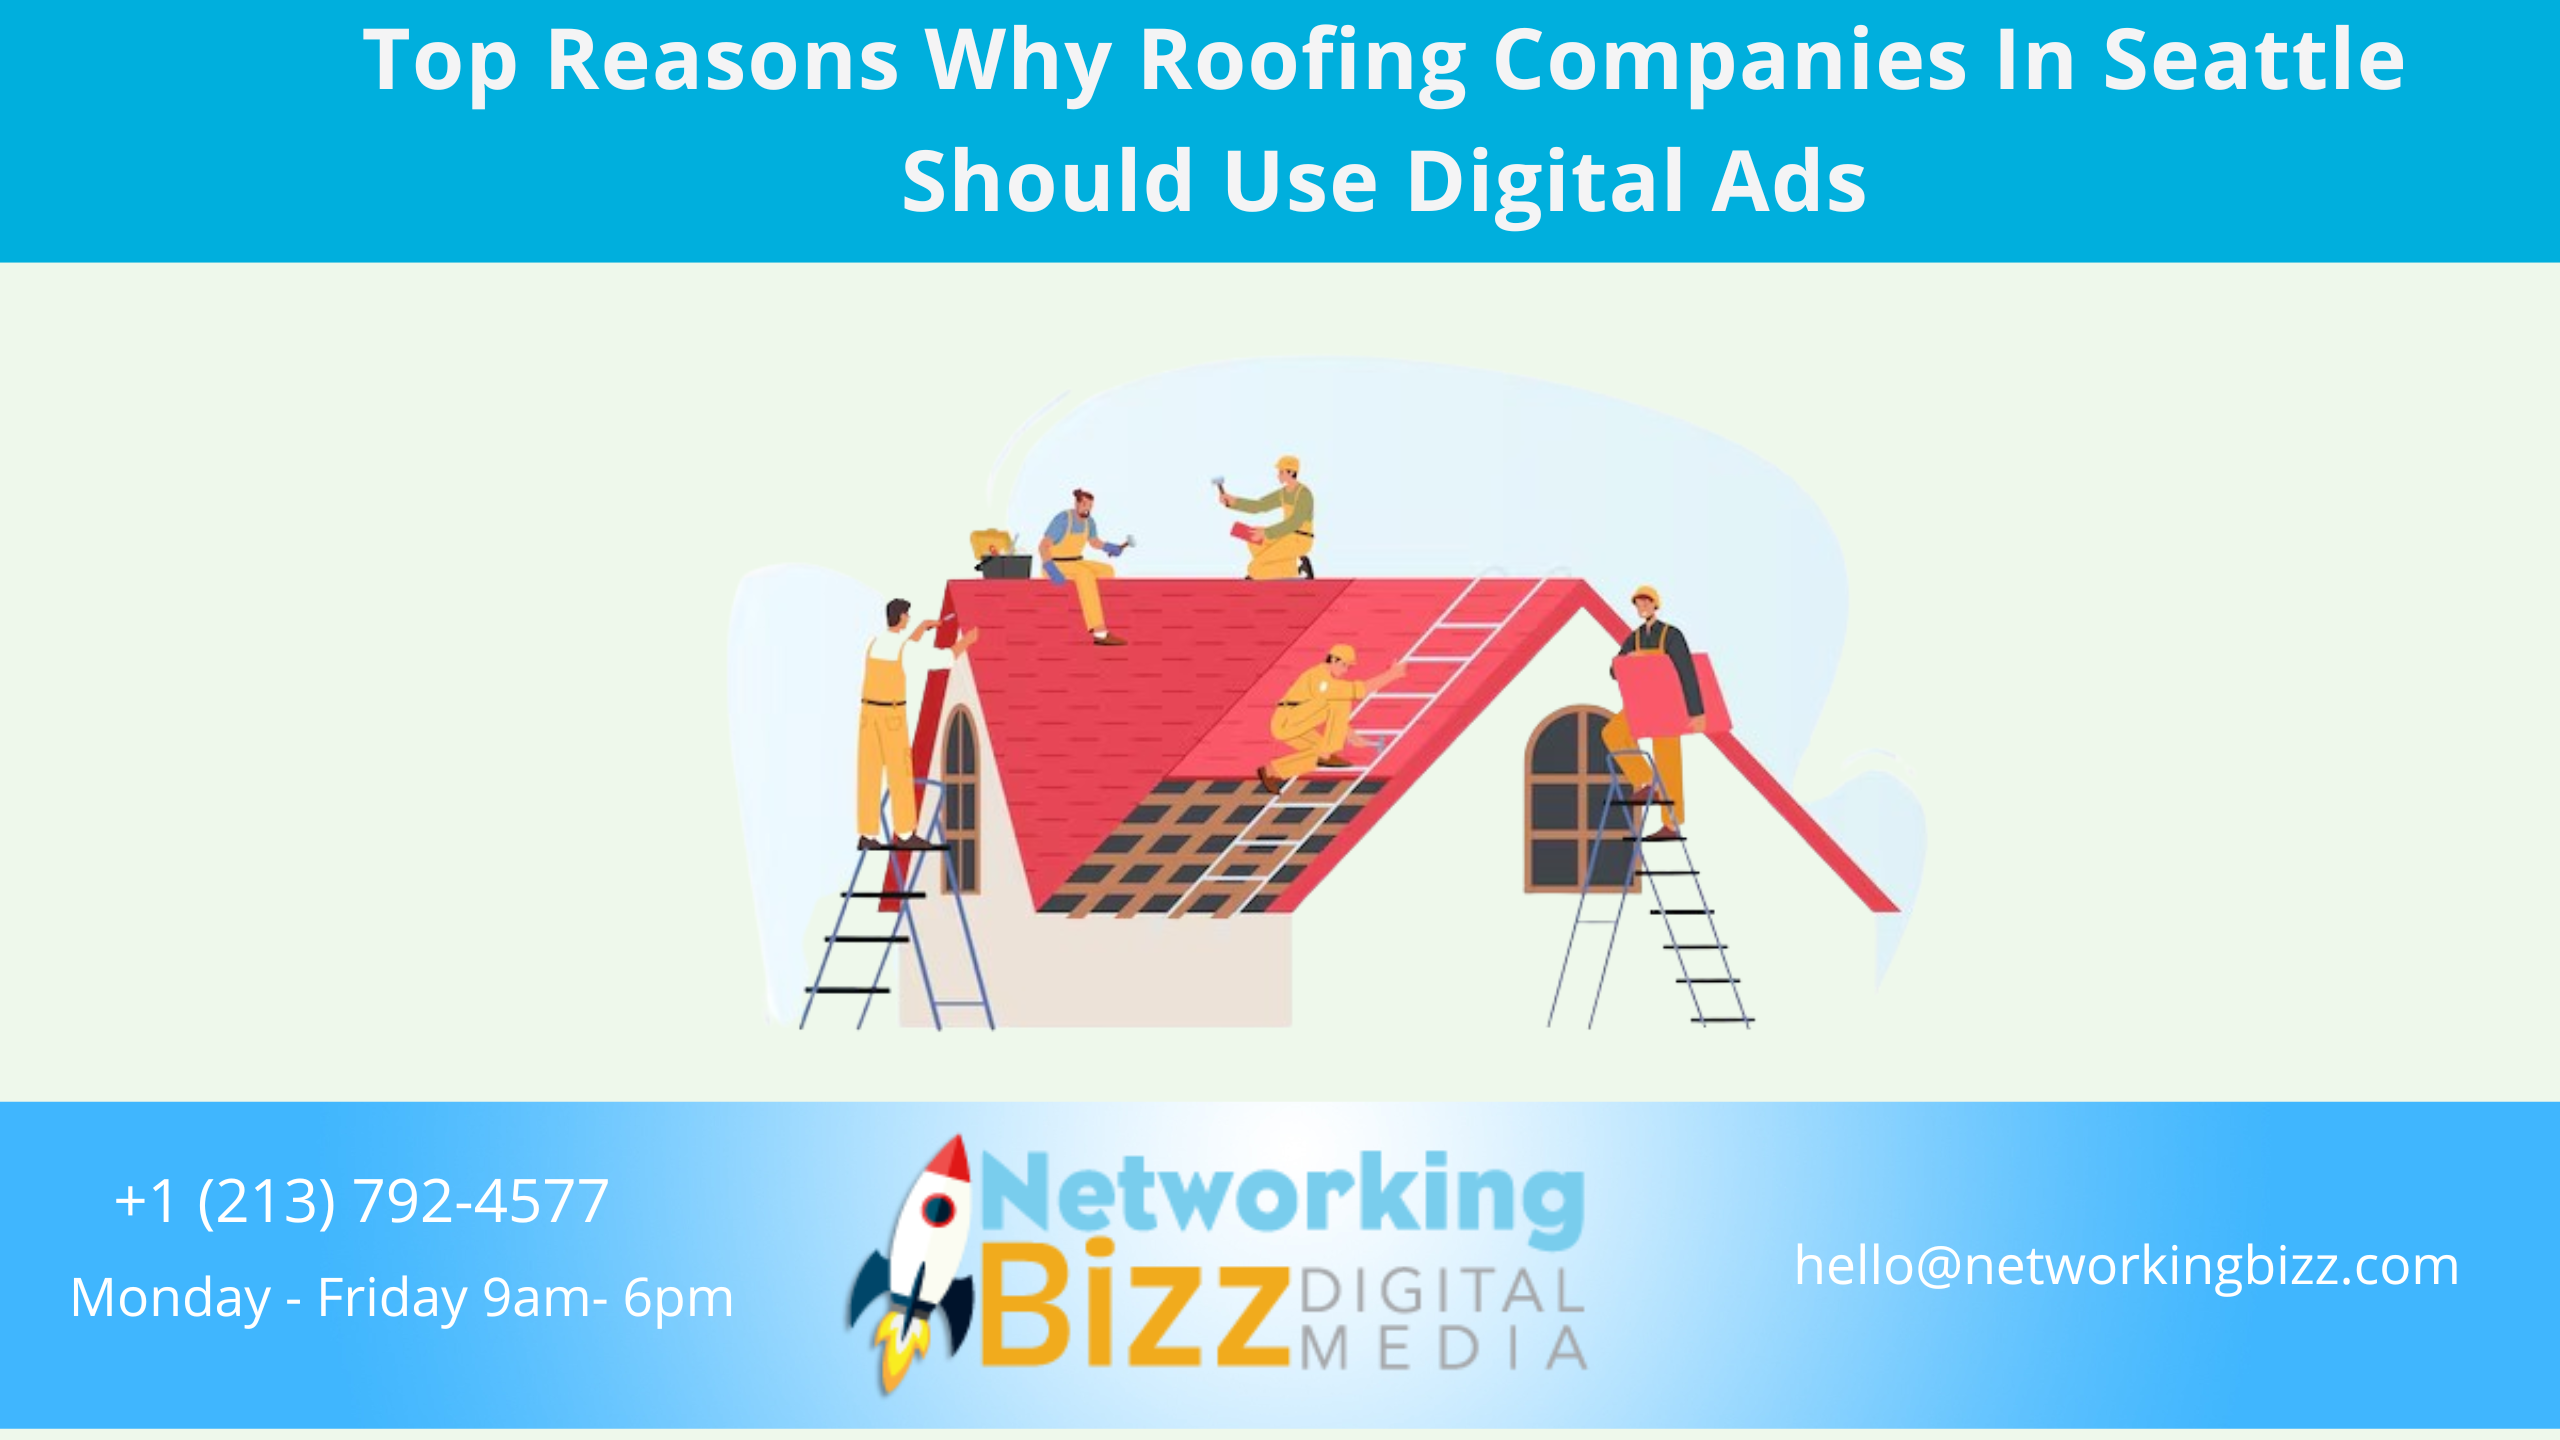 Top Reasons Why Roofing Companies In Seattle Should Use Digital Ads